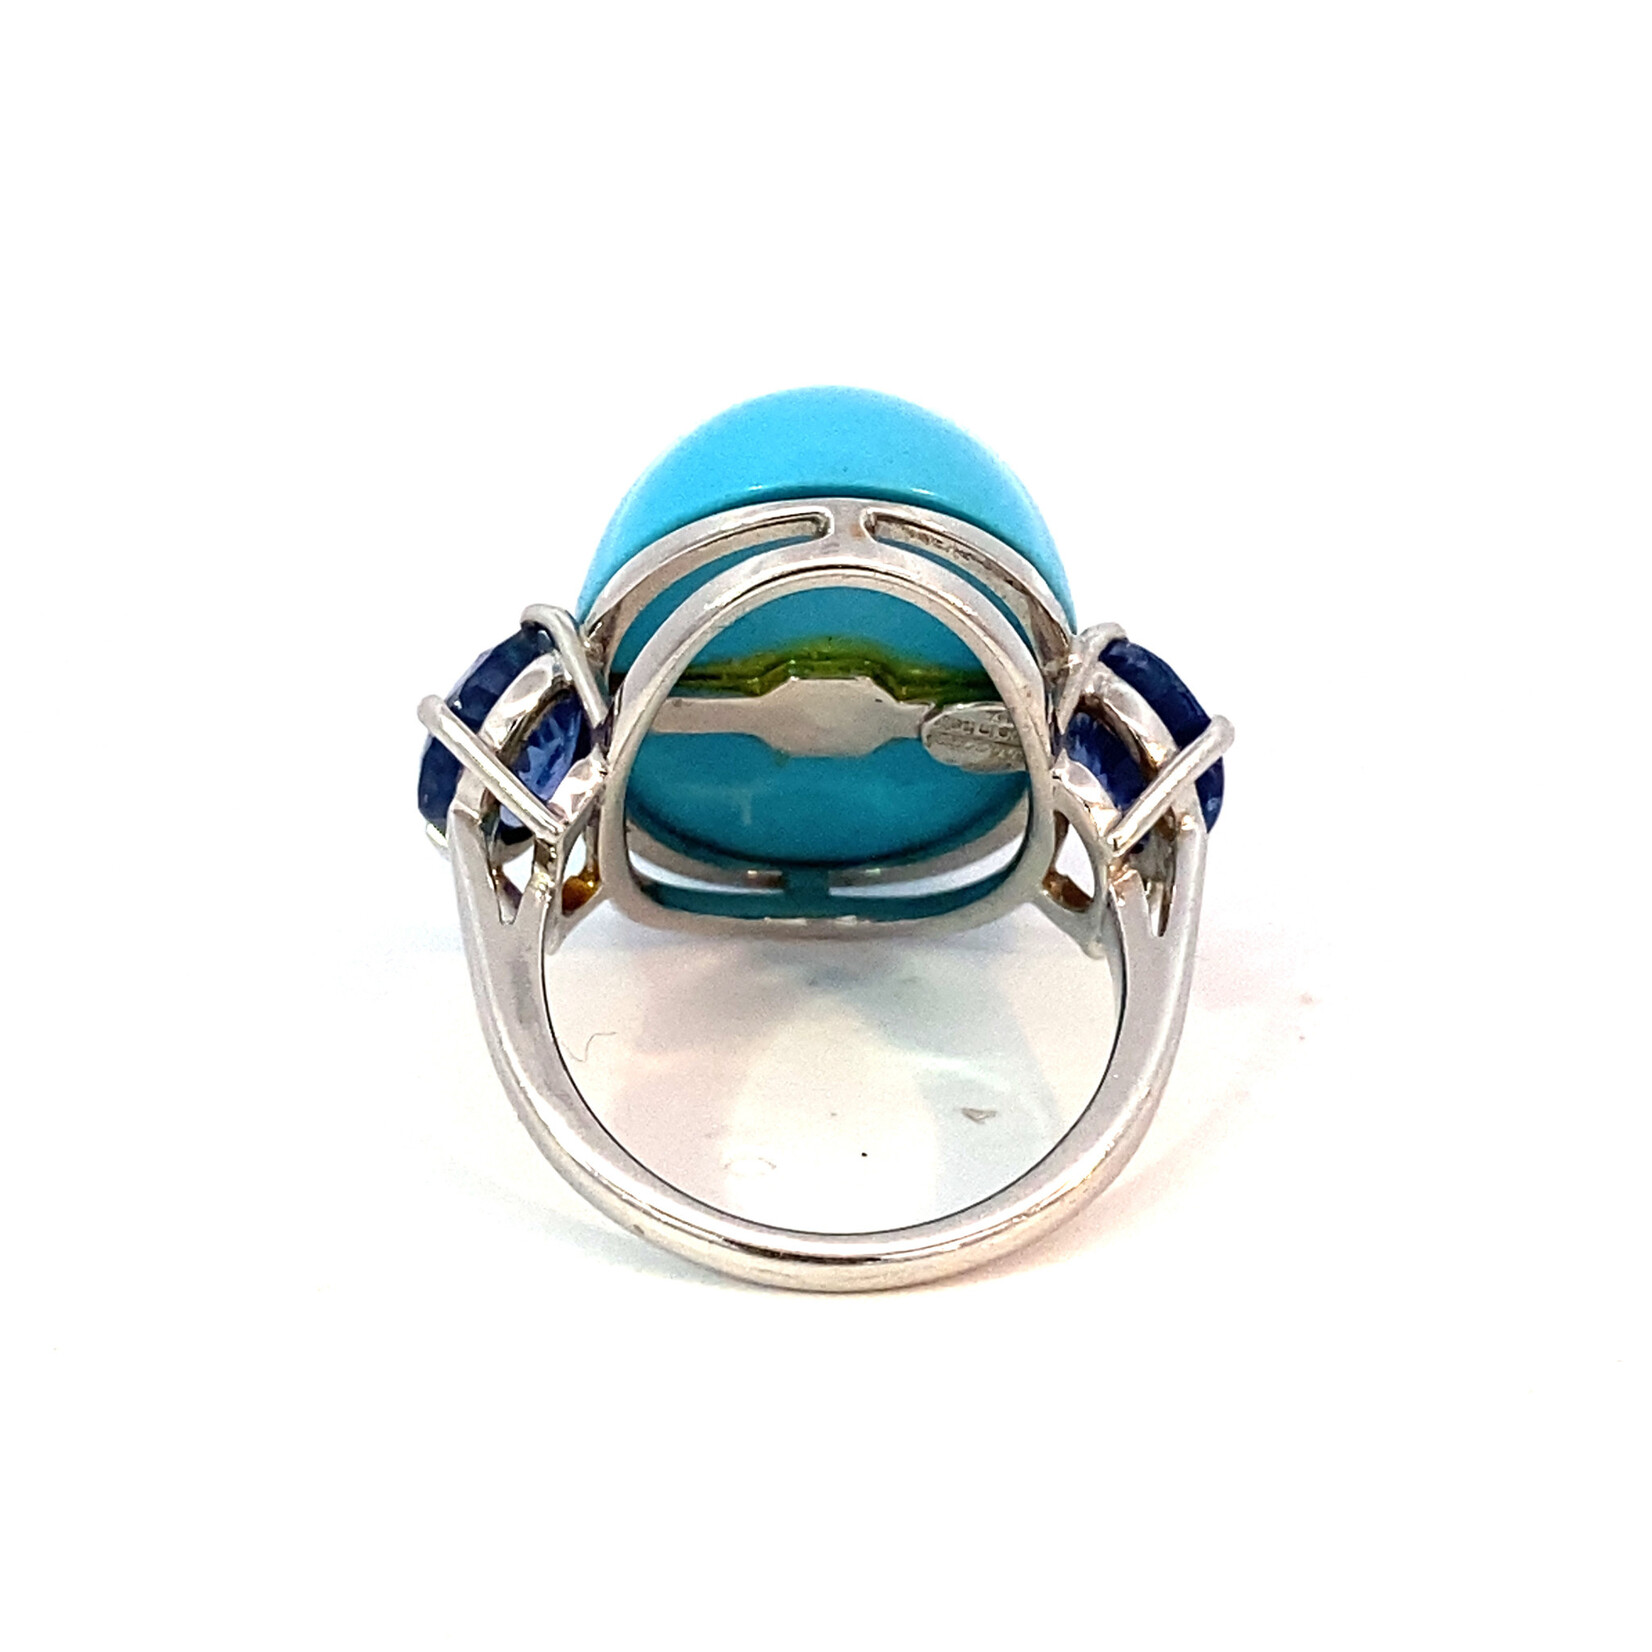 18K White Gold Oval Turquoise & Sapphire Ring size 5.5 "Sabbadini"